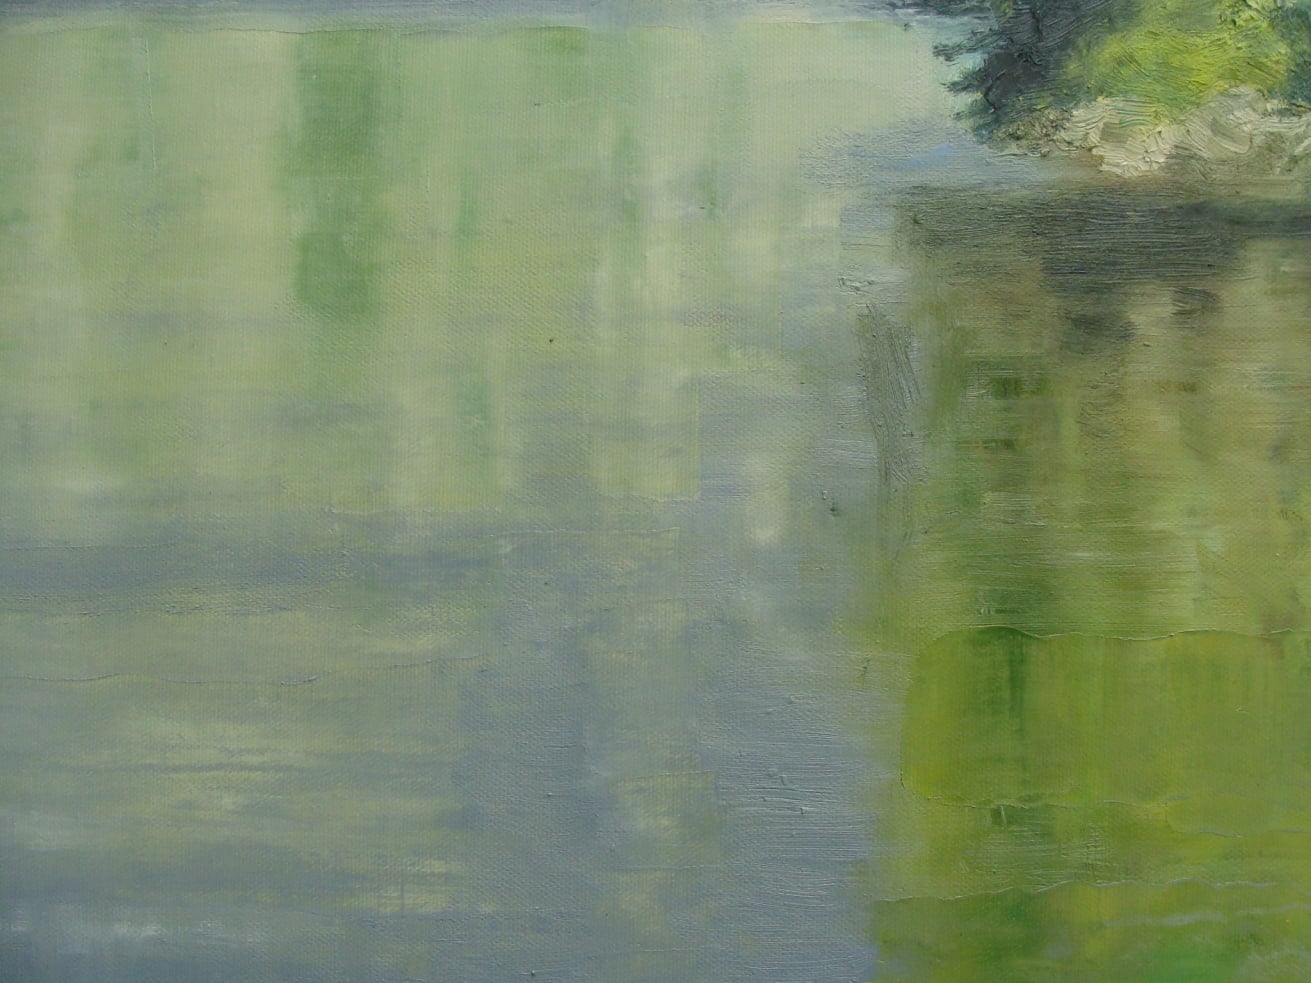 River Nore, summer iv 